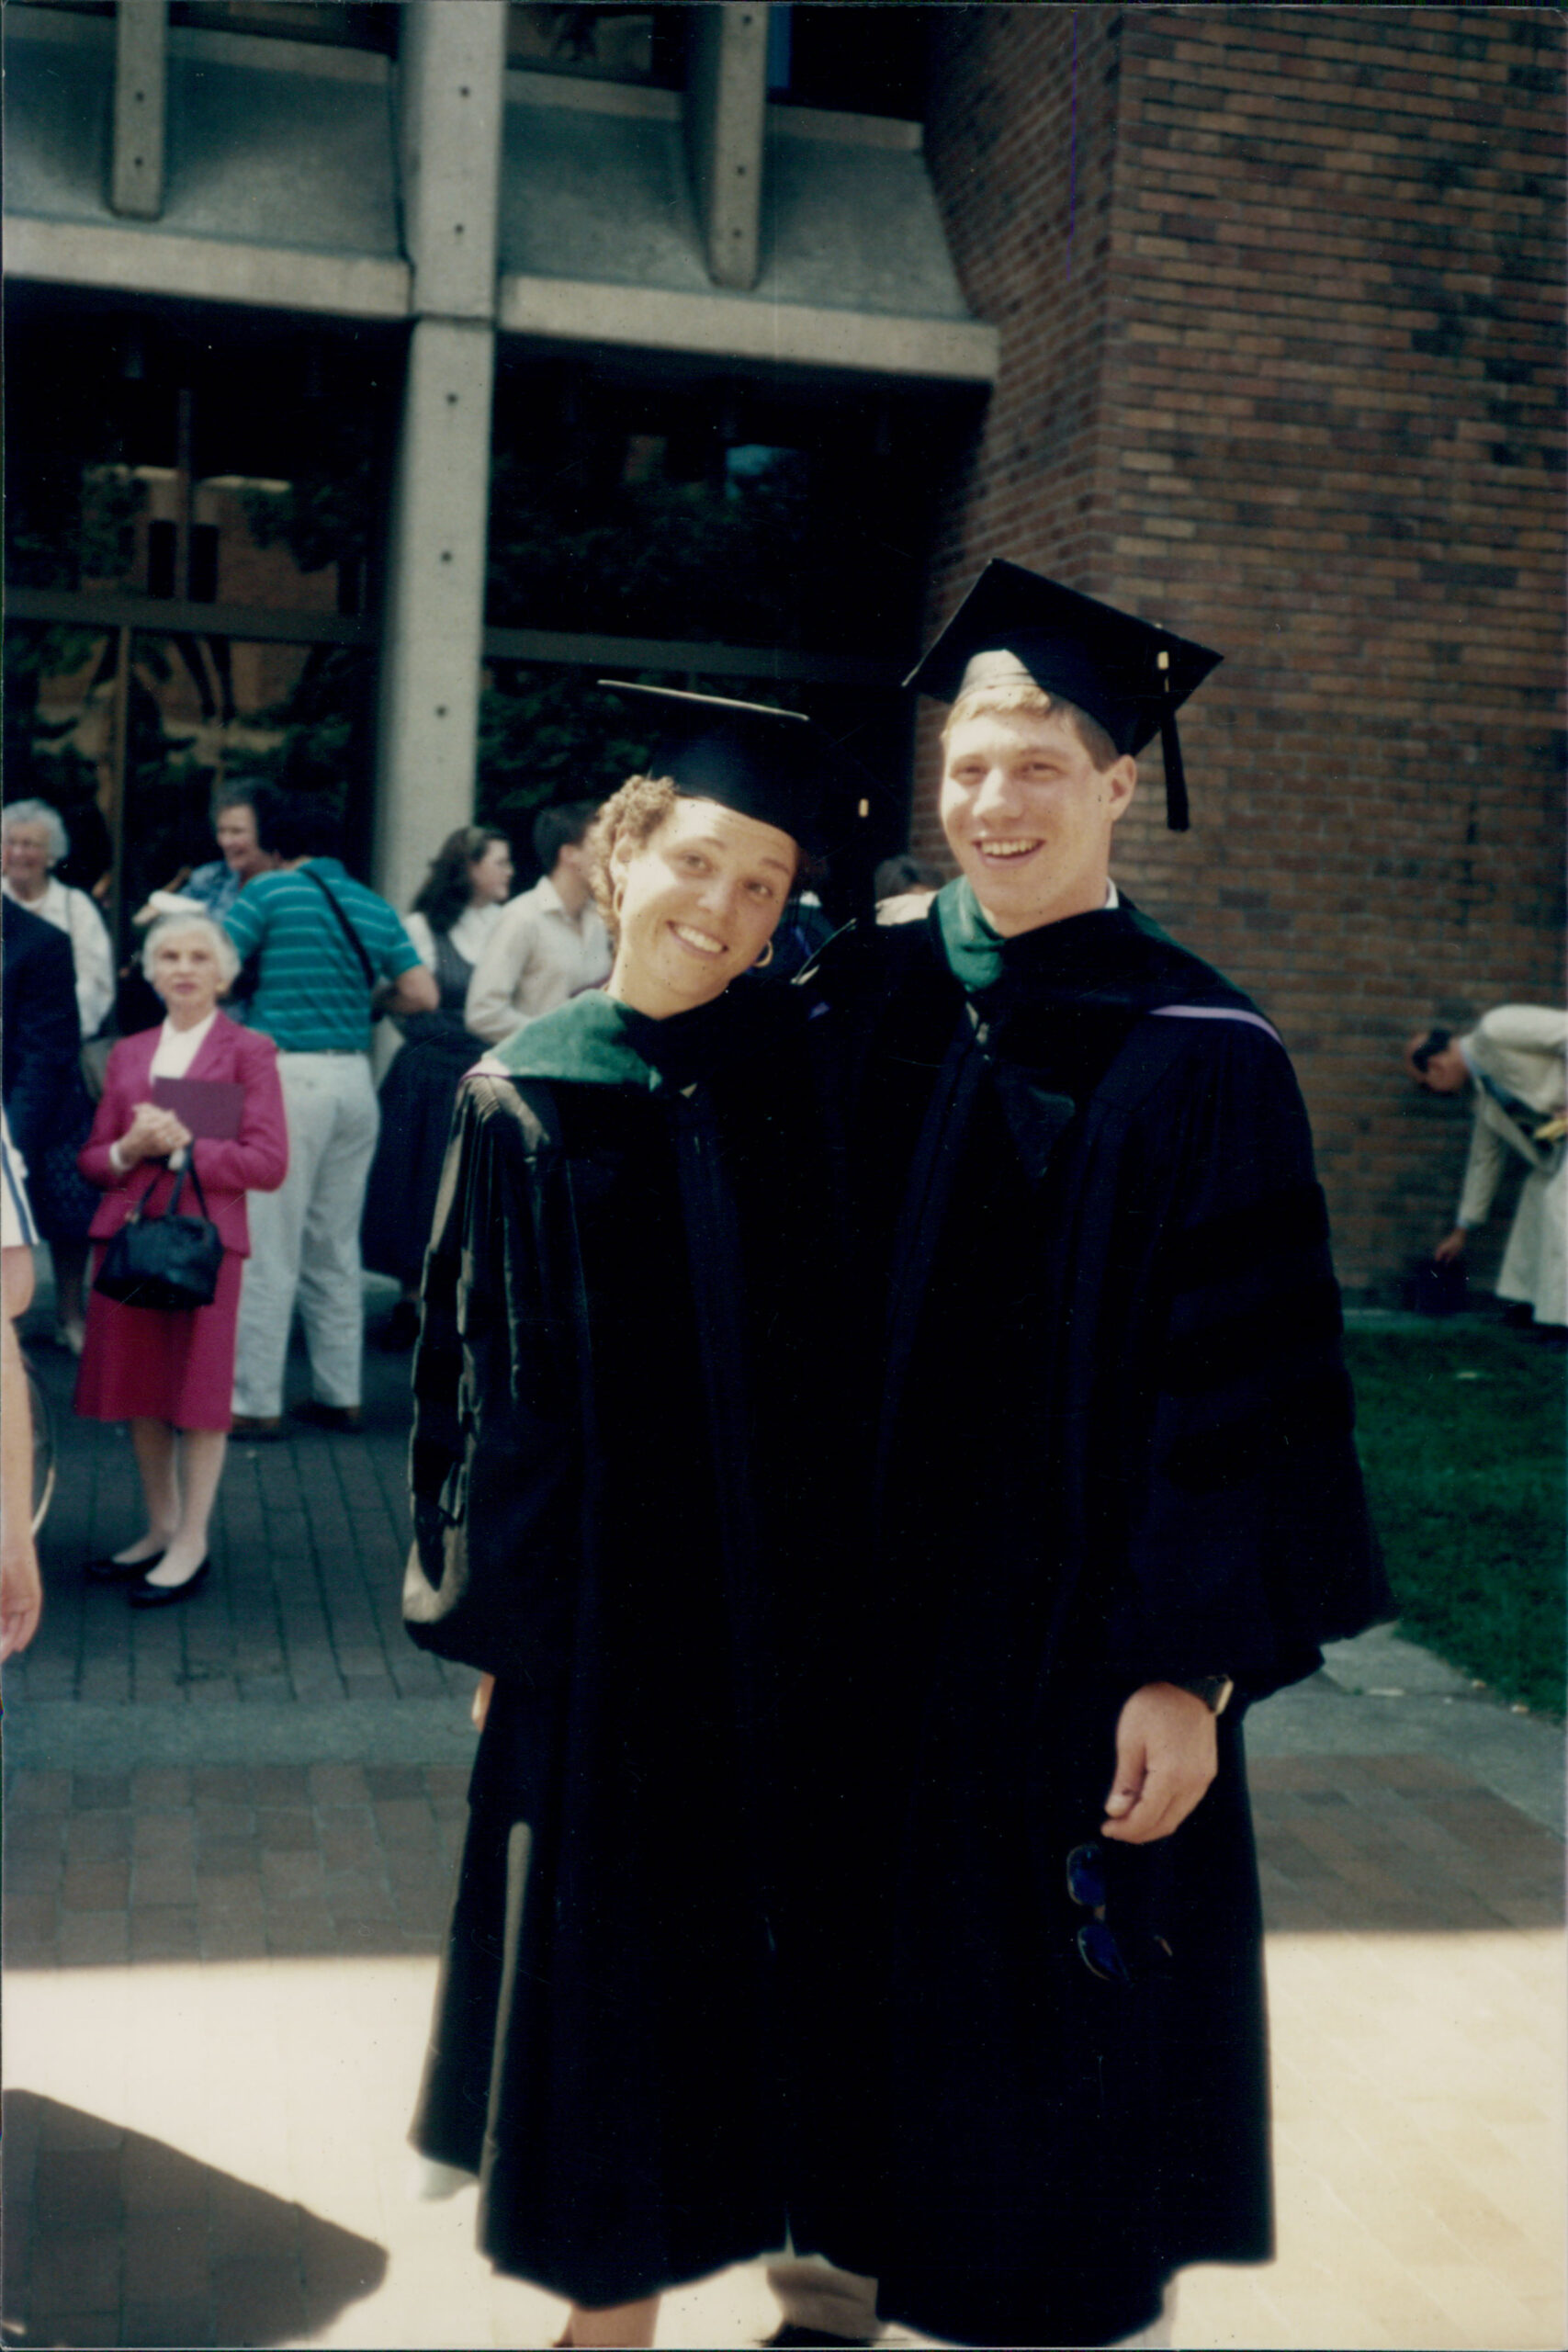 Photo of Al and Monica in graduation robes and caps.